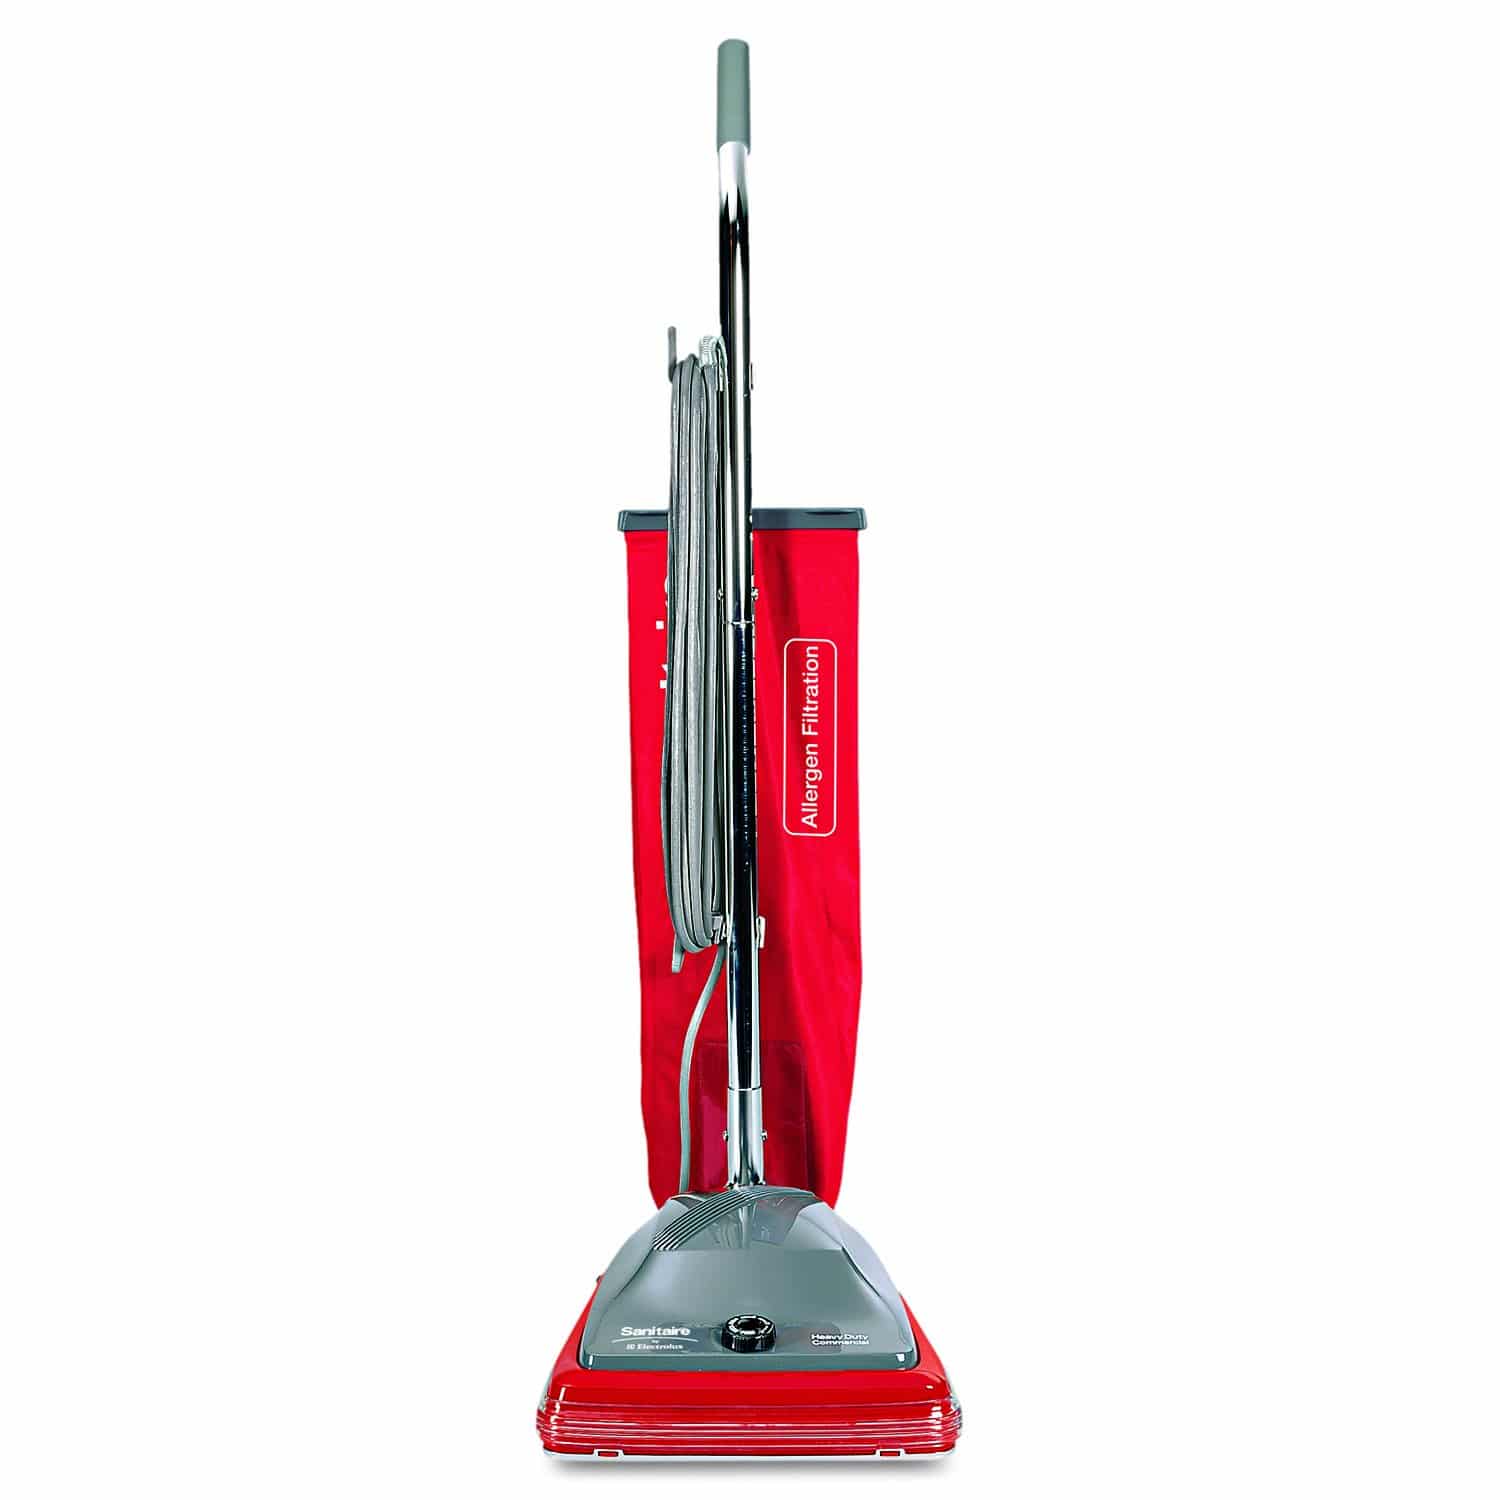 Sanitaire TRADITION Upright Vacuum SC688A